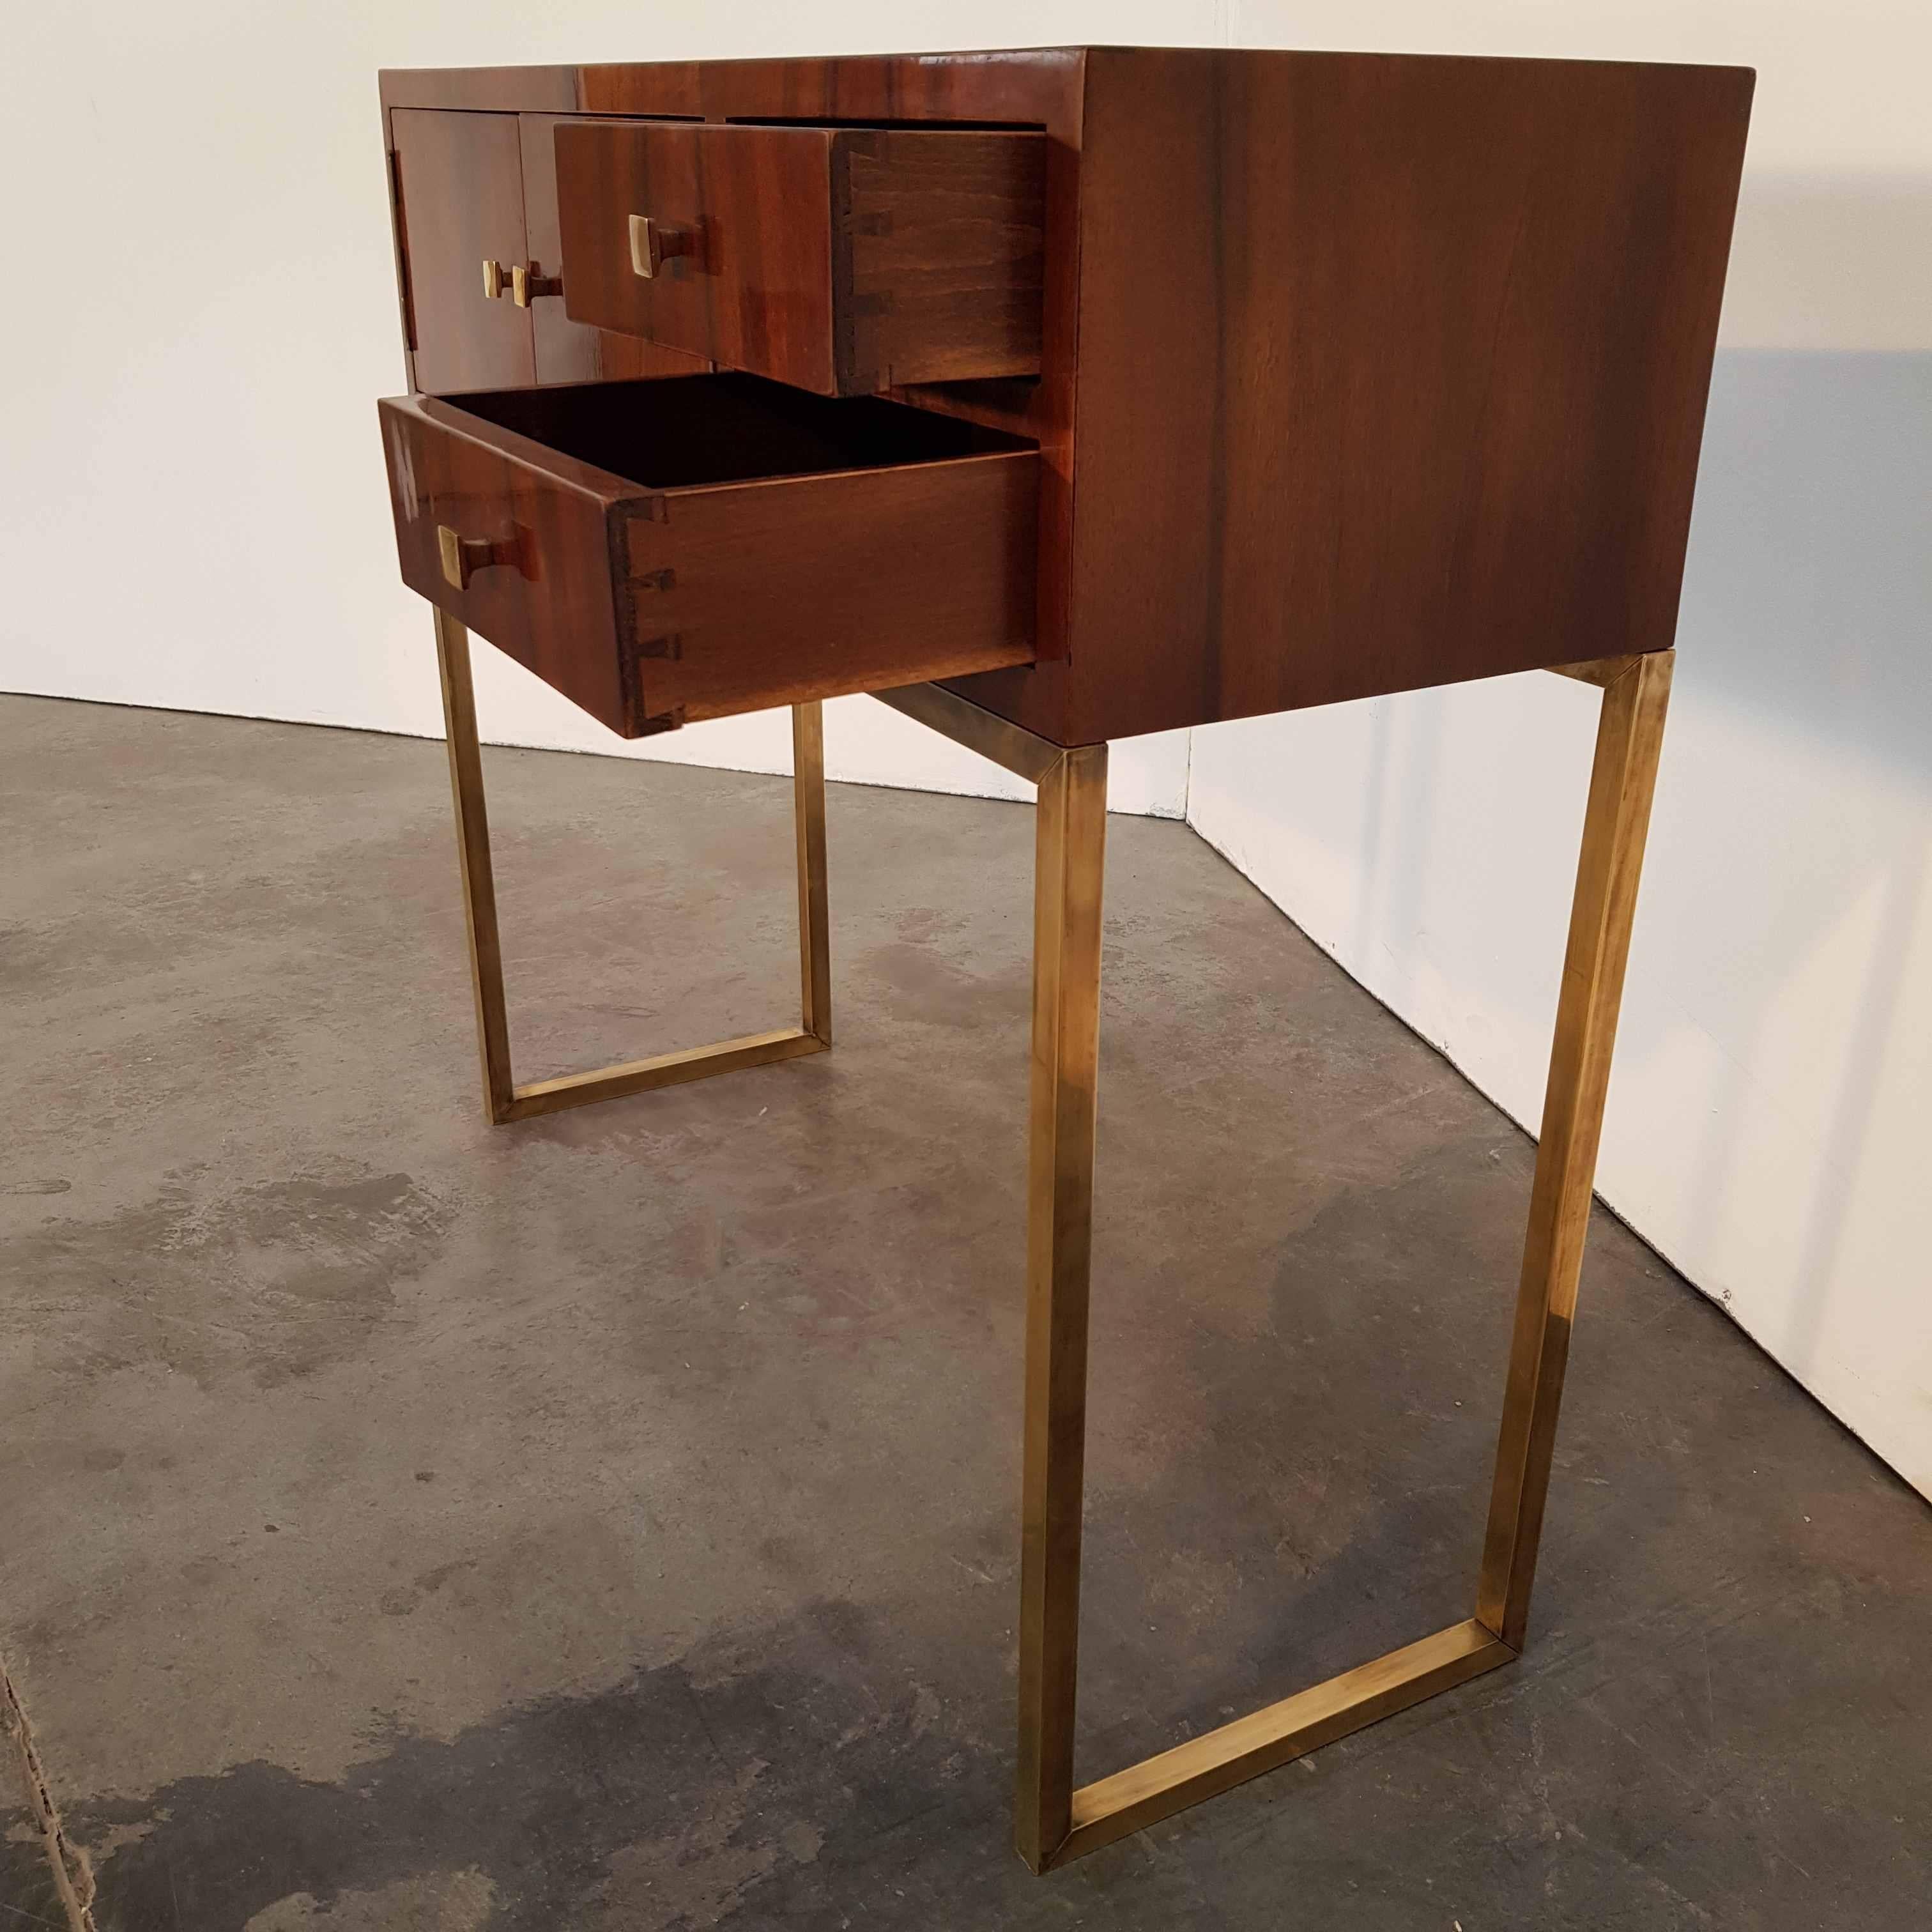 Early 20th Century Hungarian Bauhaus Console with Hand-Polished Walnut Veneer on Brass Legs For Sale